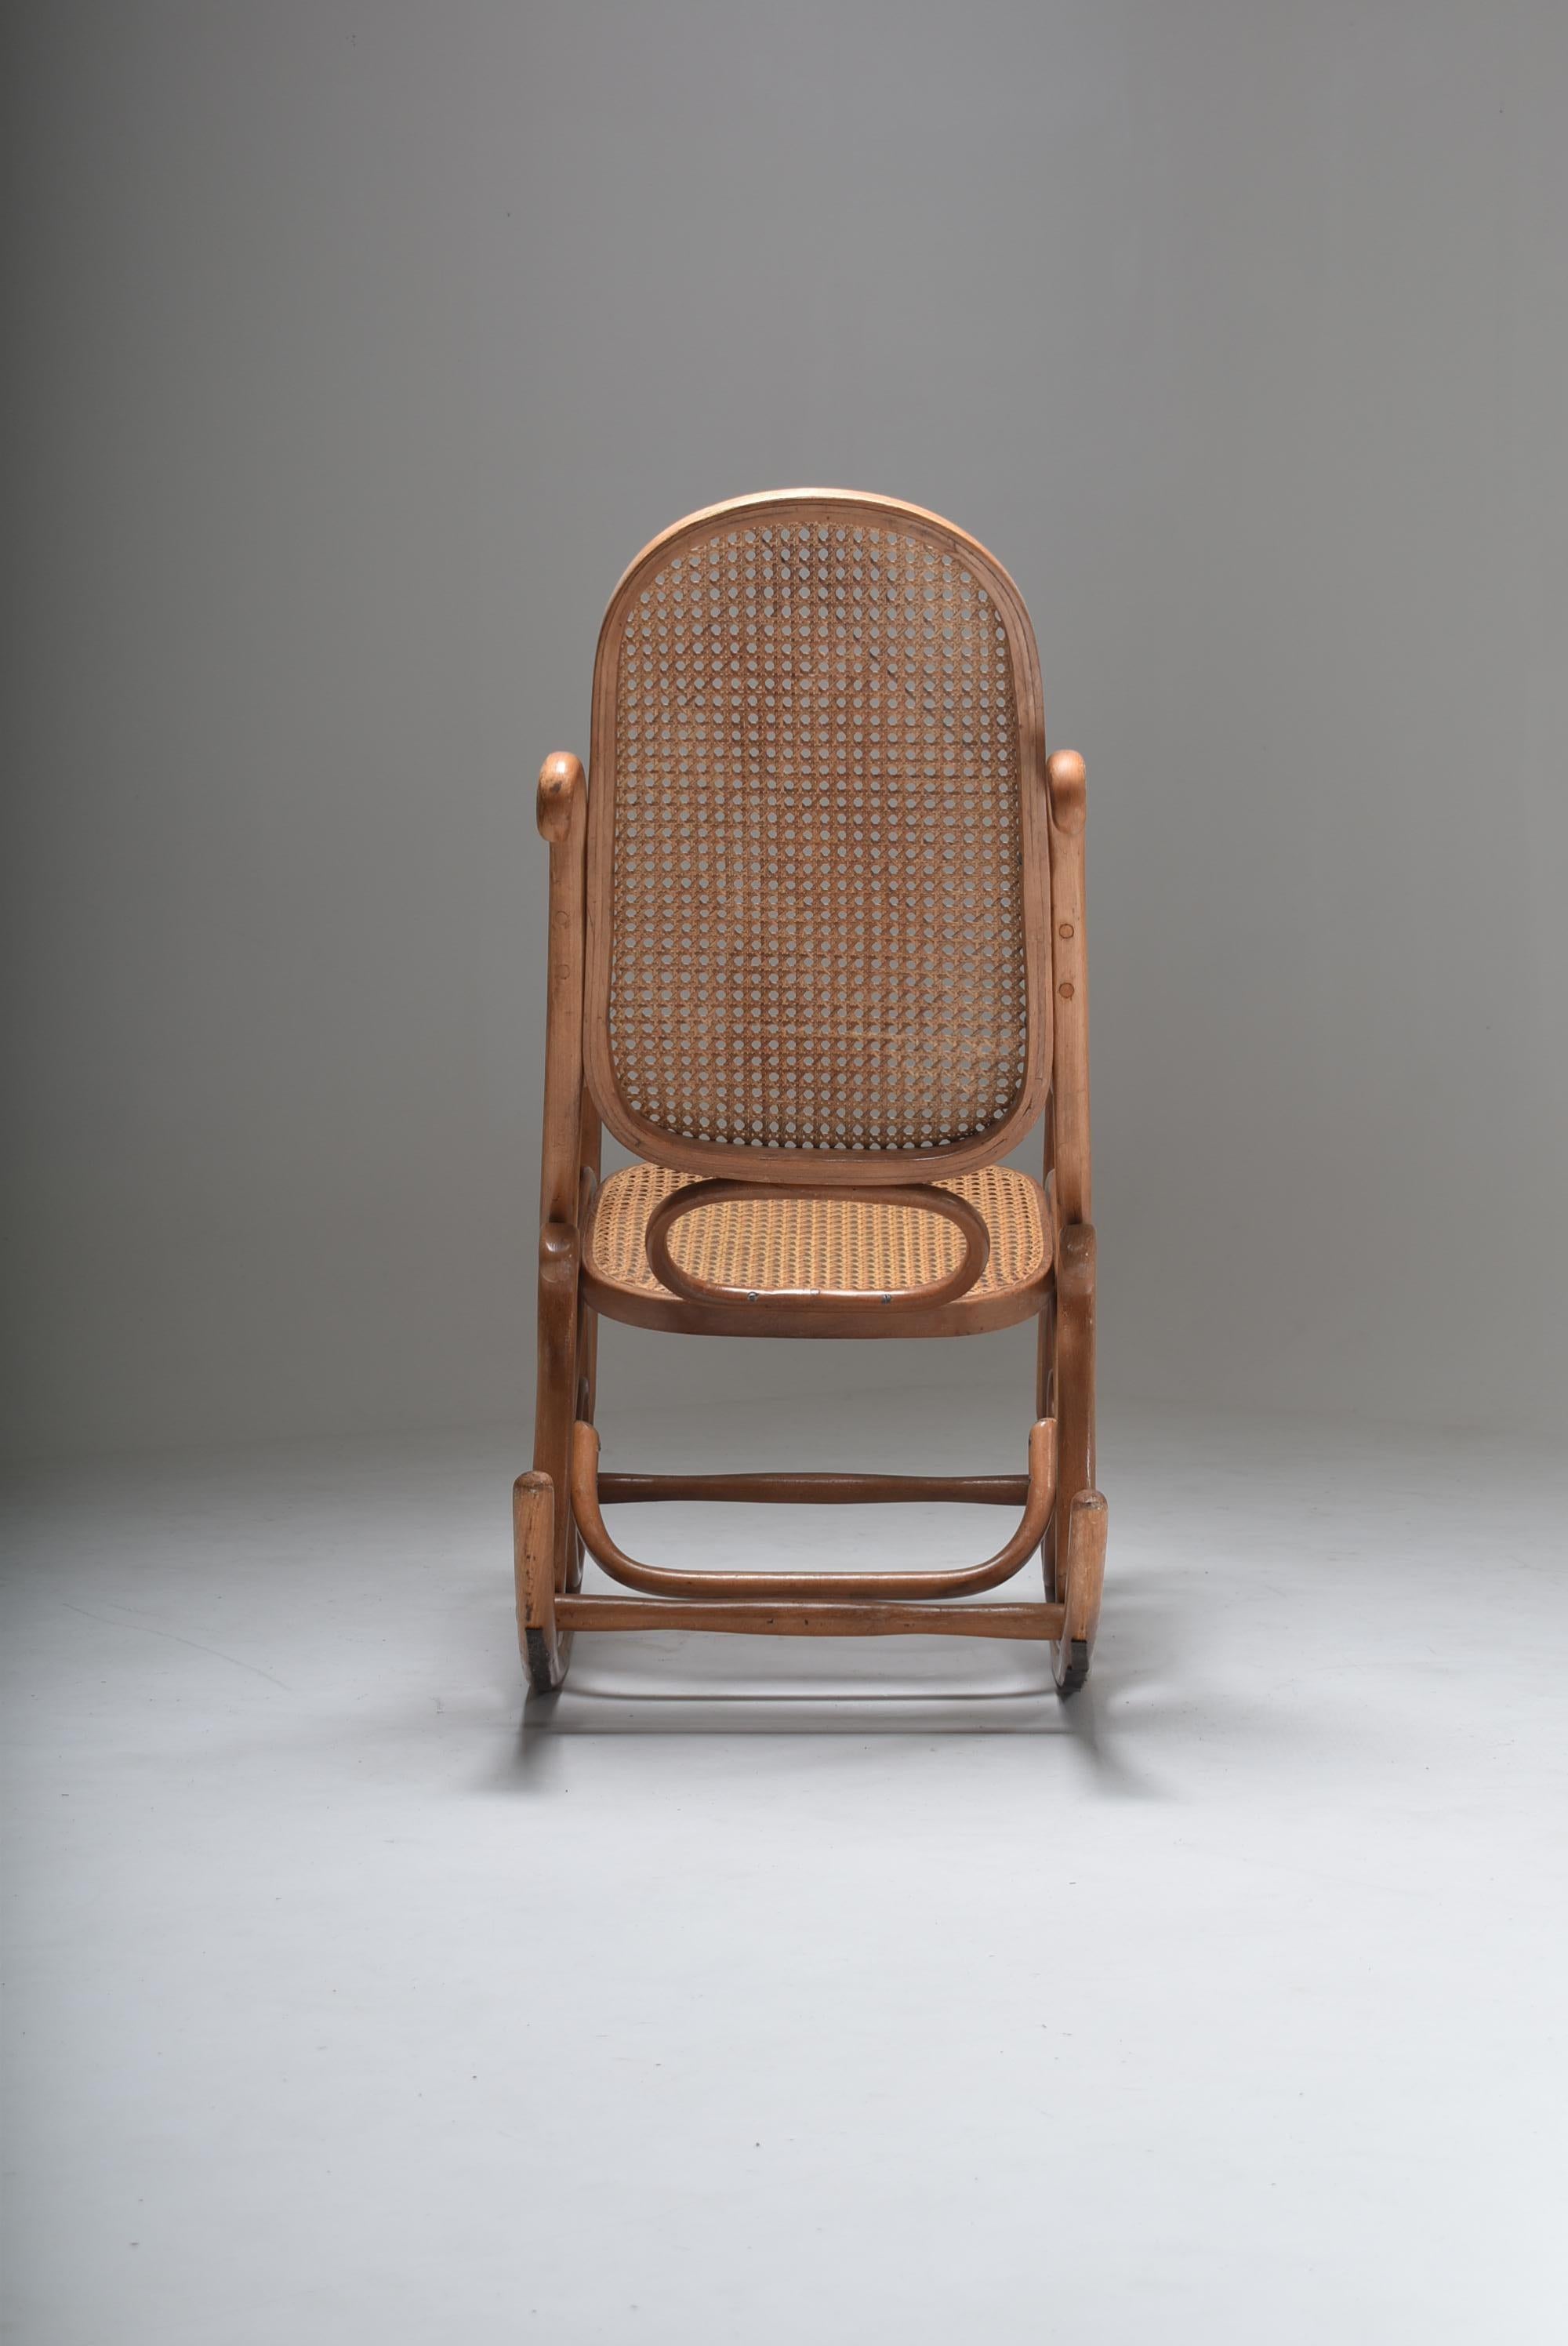 French Mid-Century Modern Bentwood and Cane Rocking Chair Thonet N° 10, France, 1950